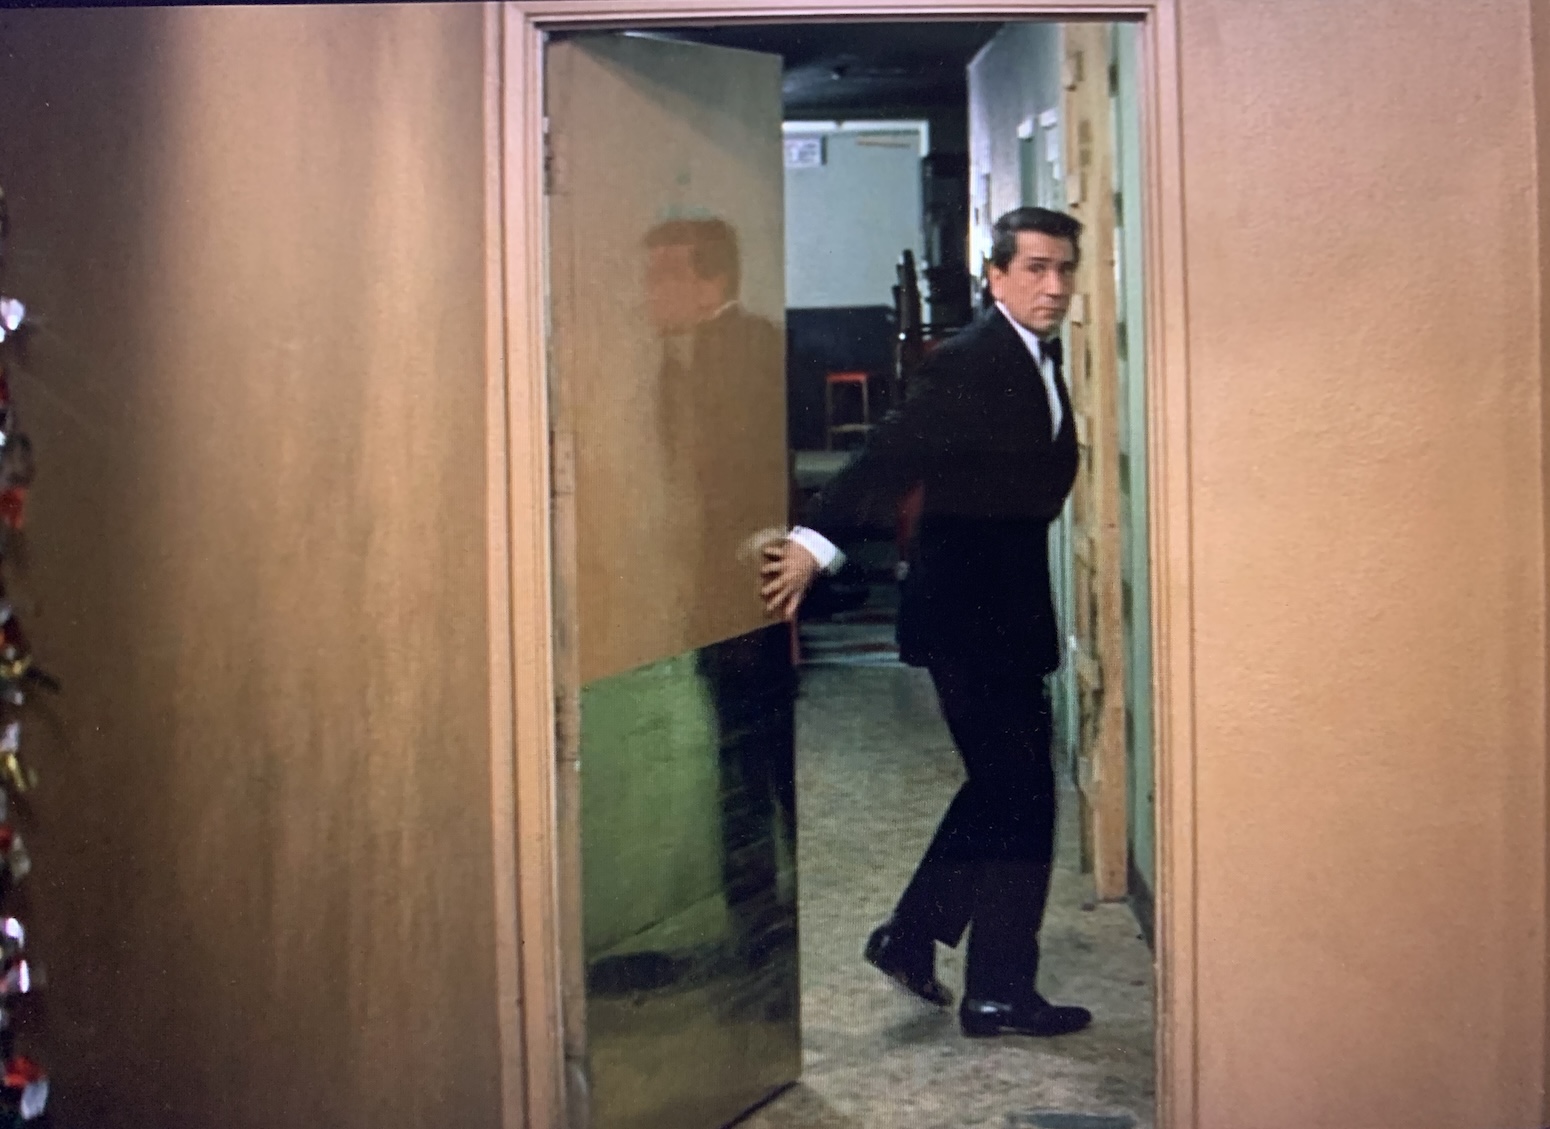 Richard Conte, in a tuxedo, stands turned sideways and holding open a service door, the bottom covered in sheet metal, that leads into a back hallway. A vertical ladder made of lumber is against the wall of the hall. Conte wears a furtive expression and is reflected full-length in the shiny surface of the door, in case he needed to draw any more attention to himself. 